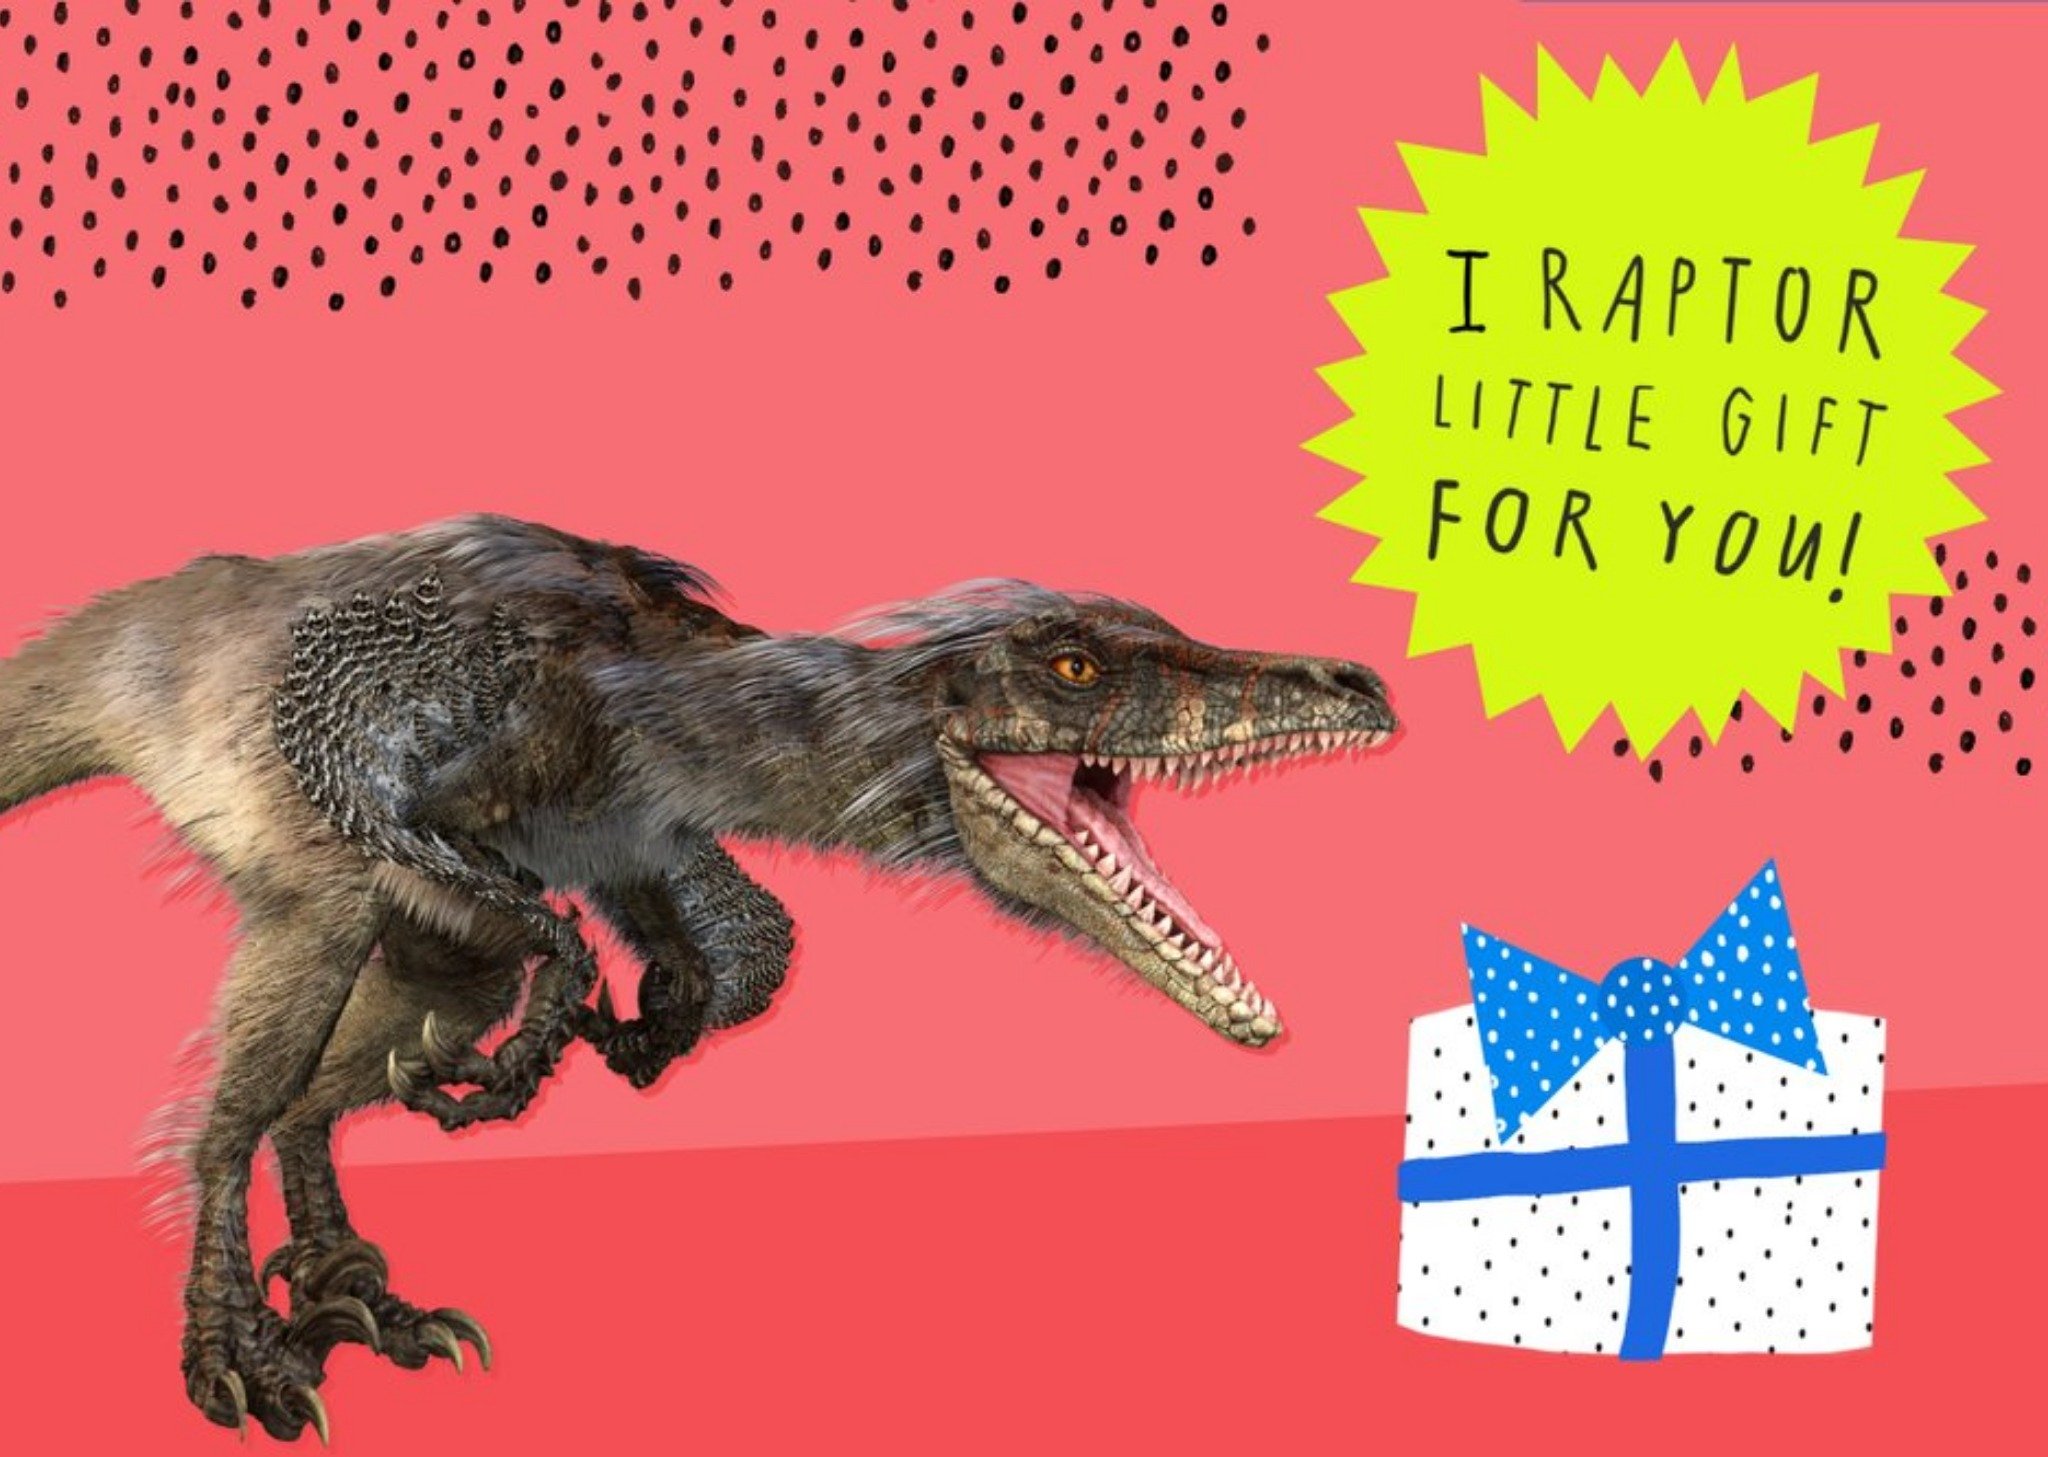 The Natural History Museum I Raptor Little Gift Dinosaur Birthday Card, Large